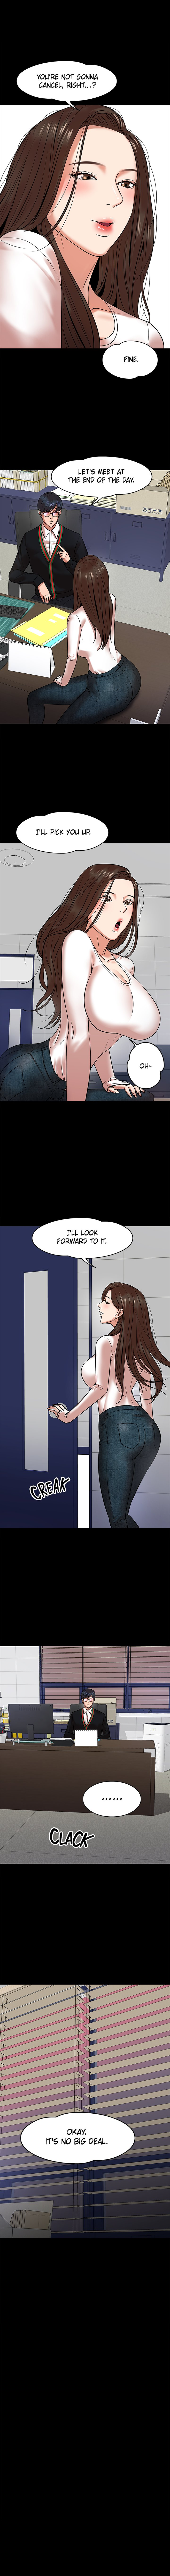 Are You Just Going To Watch? - Chapter 15 Page 12